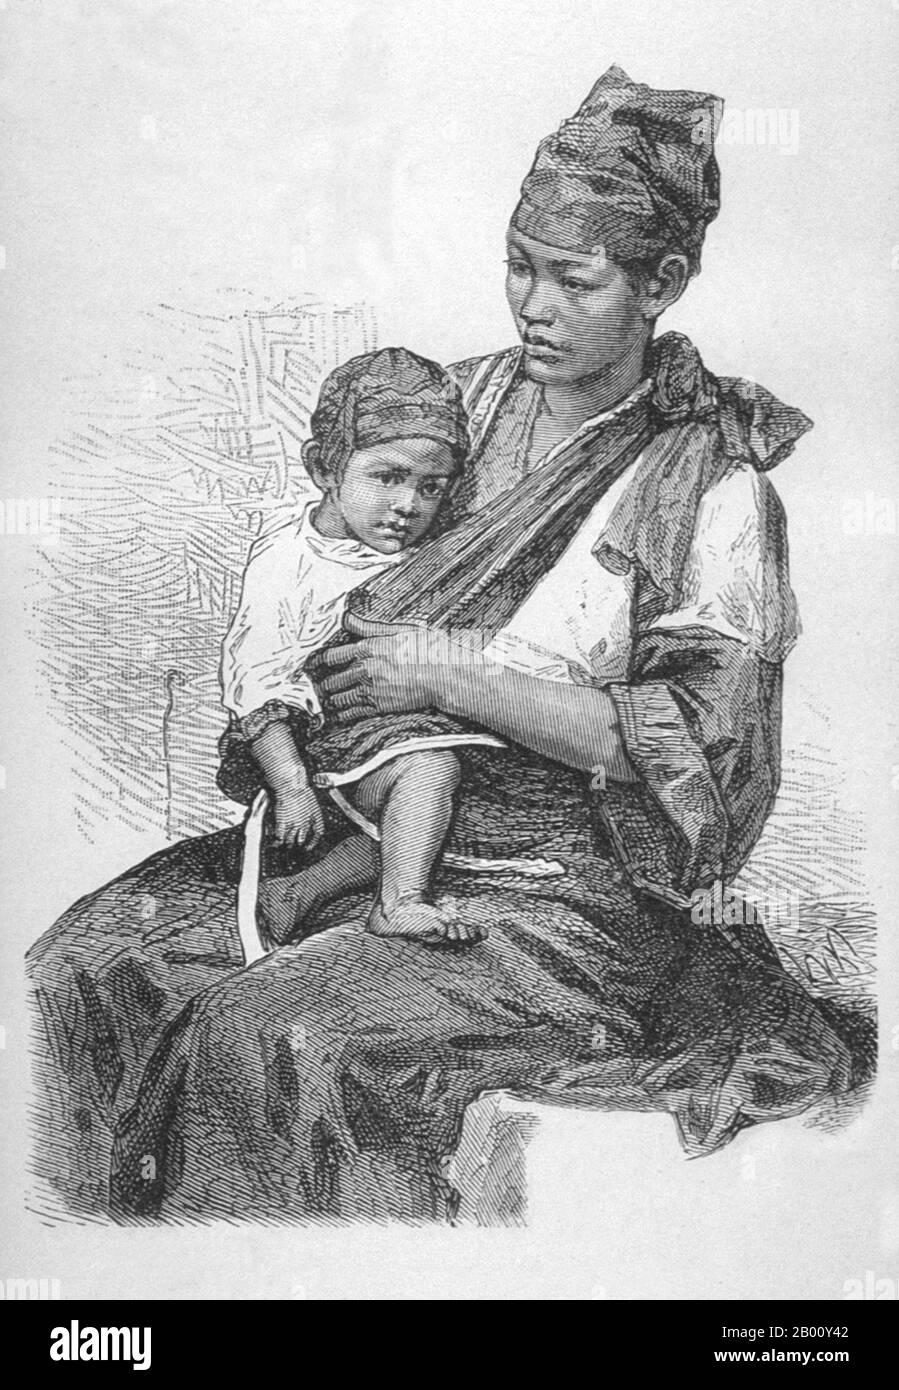 China/Taiwan: 'Pepohoan Mother and Child'. Illustration by John Thomson (1837-1921), 1875.  Taiwanese aborigines (Chinese: yuánzhùmín; Pe̍h-ōe-jī: gôan-chū-bîn; literally 'original inhabitants') may have been living on the islands for approximately 8,000 years before major Han Chinese immigration began in the 17th century. Taiwanese aborigines are Austronesian peoples, with linguistic and genetic ties to other Austronesian ethnic groups, such as peoples of the Philippines, Malaysia, Indonesia, Madagascar and Oceania. Stock Photo